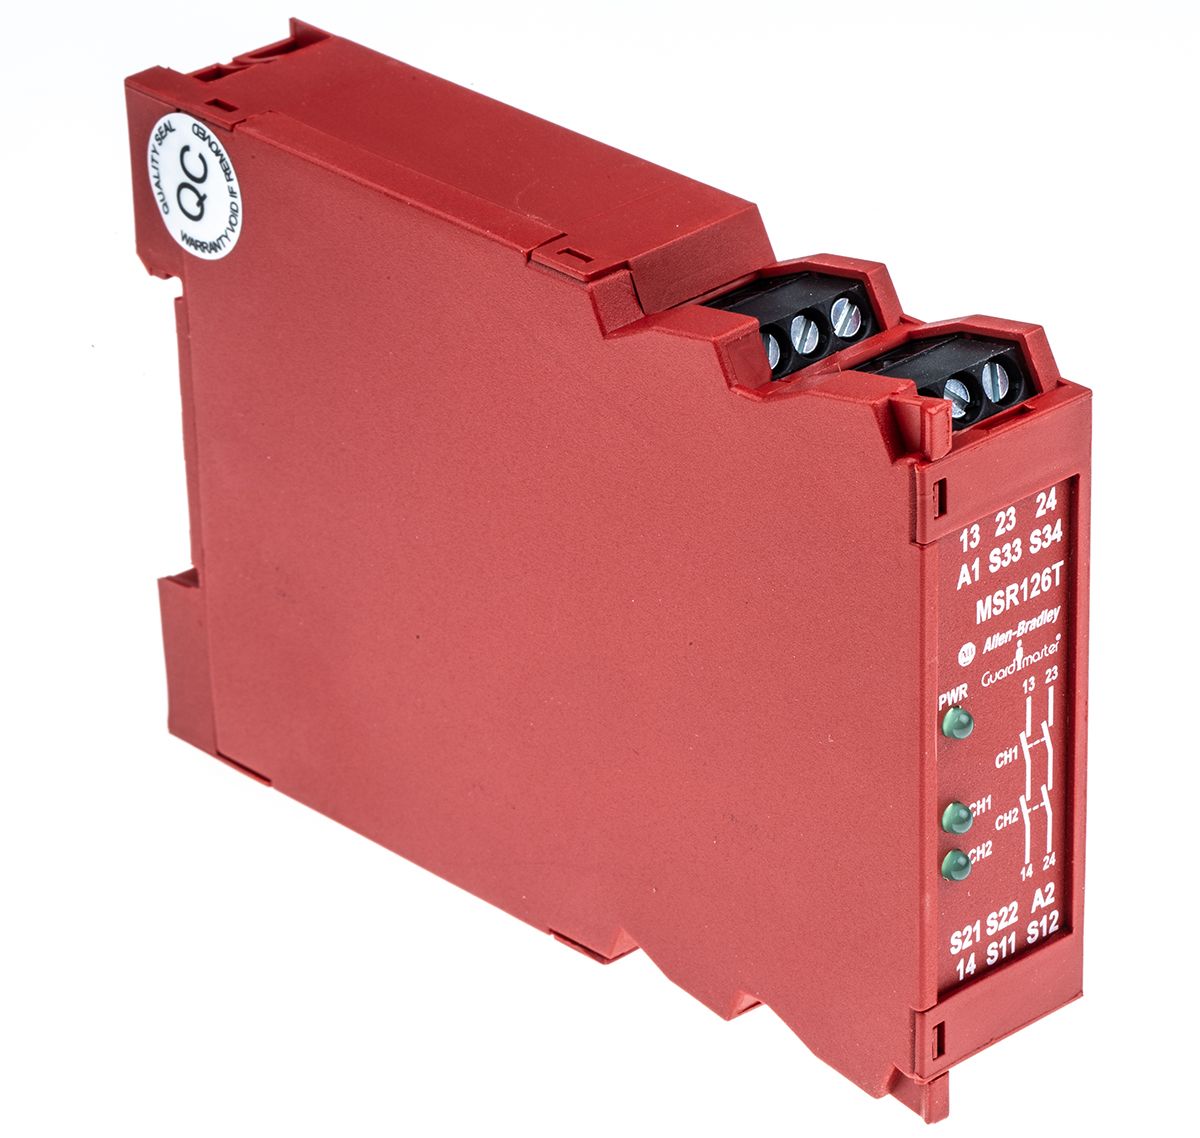 Rockwell Automation MSR126T Series Single-Channel Light Beam/Curtain, Safety Switch/Interlock Safety Relay, 24V ac/dc,